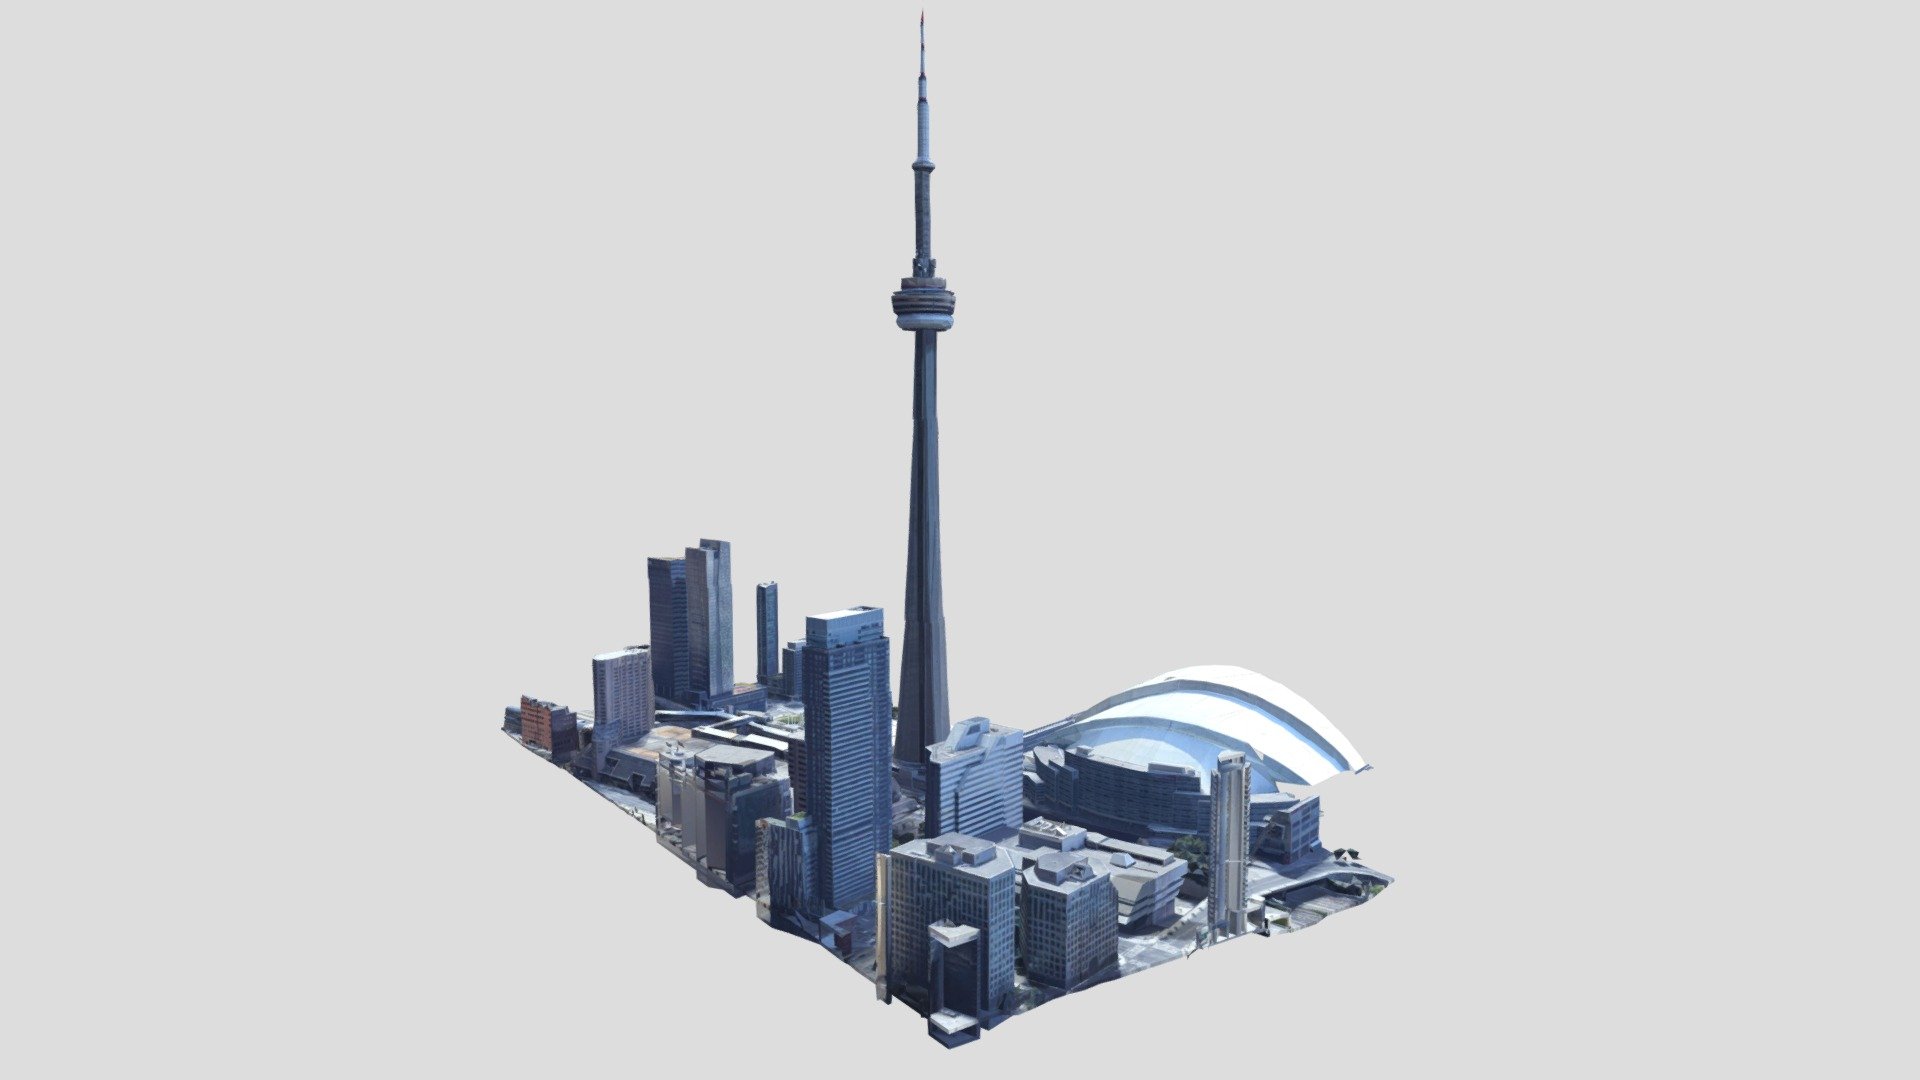 Vector Element Design  CN Tower by Fatemeh Mohsenizadeh on Dribbble